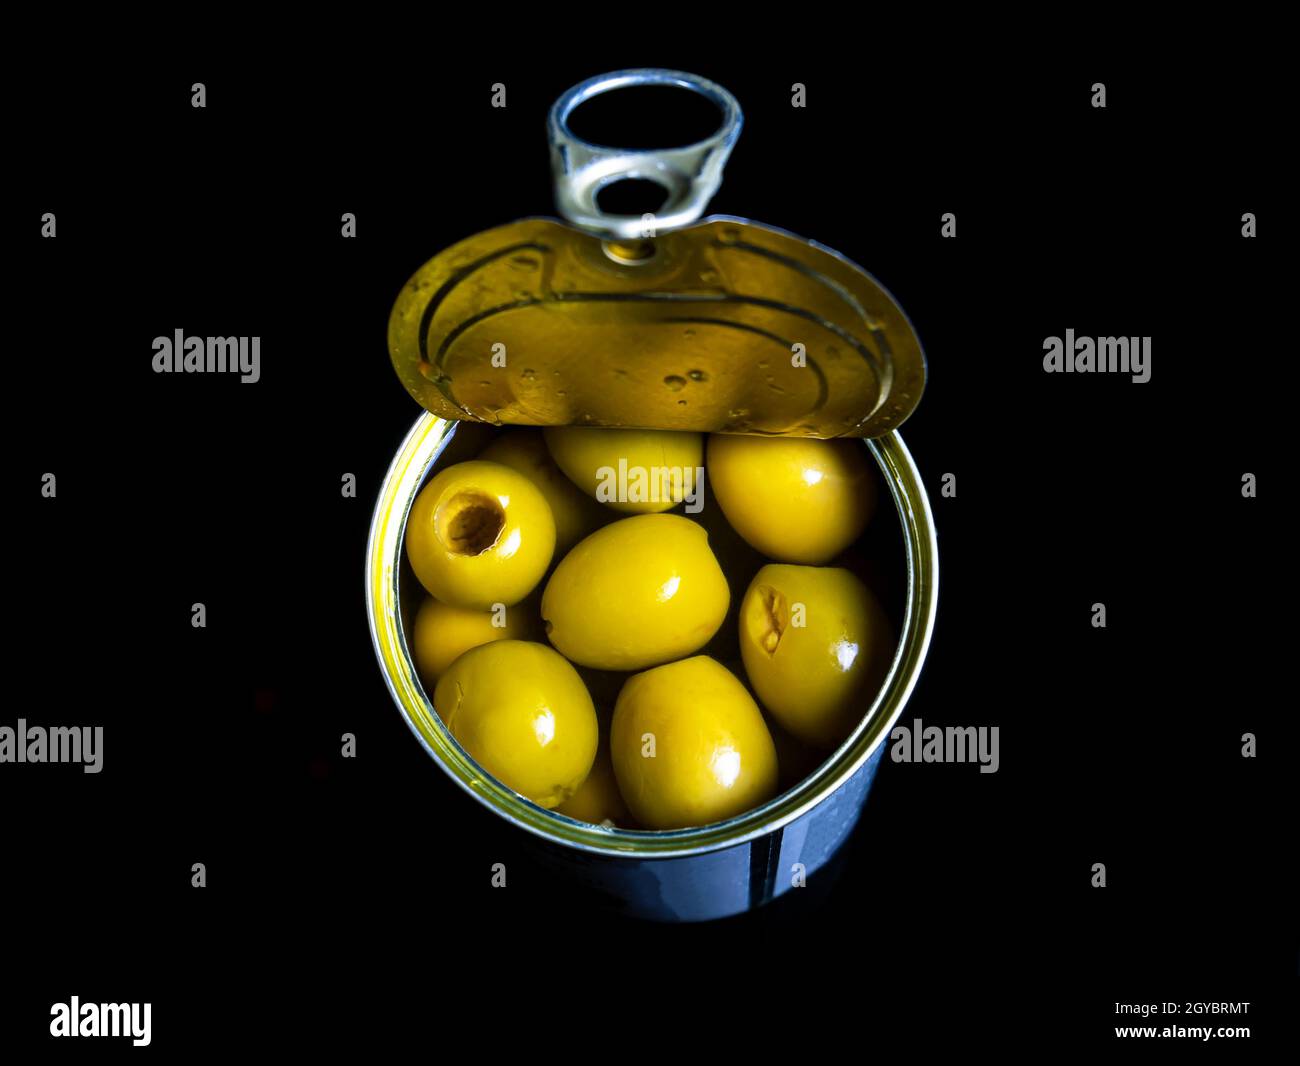 Green olives in a tin can on a black background. Green olive fruits. Olives berries. Olive fruits. Vegetables and fruits. Food photo. Canned food. Sna Stock Photo